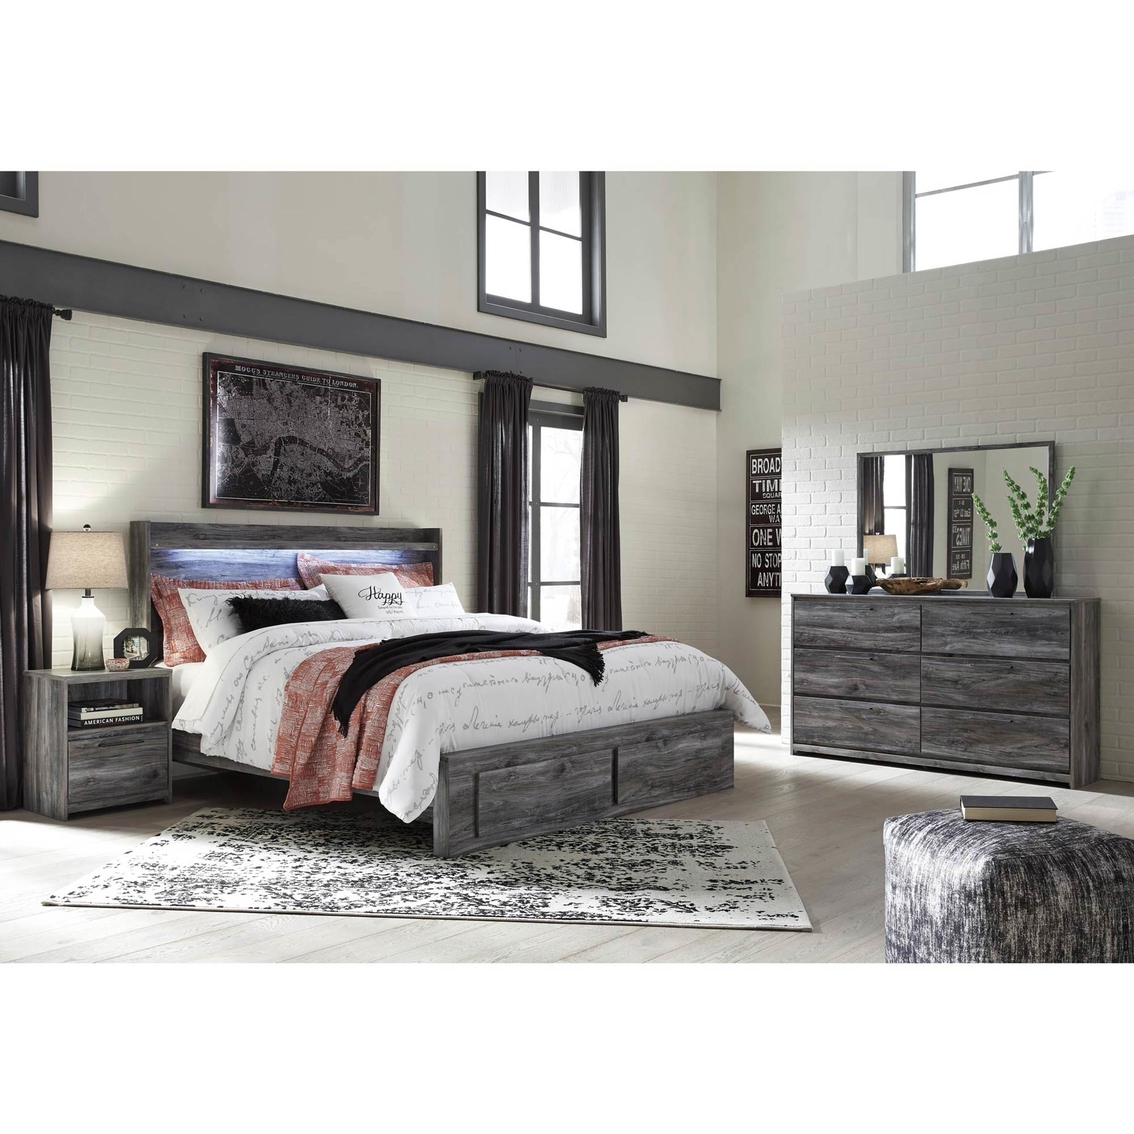 Signature Design by Ashley Baystorm 2 Drawer Storage Bed 4 pc. Set - Image 2 of 2